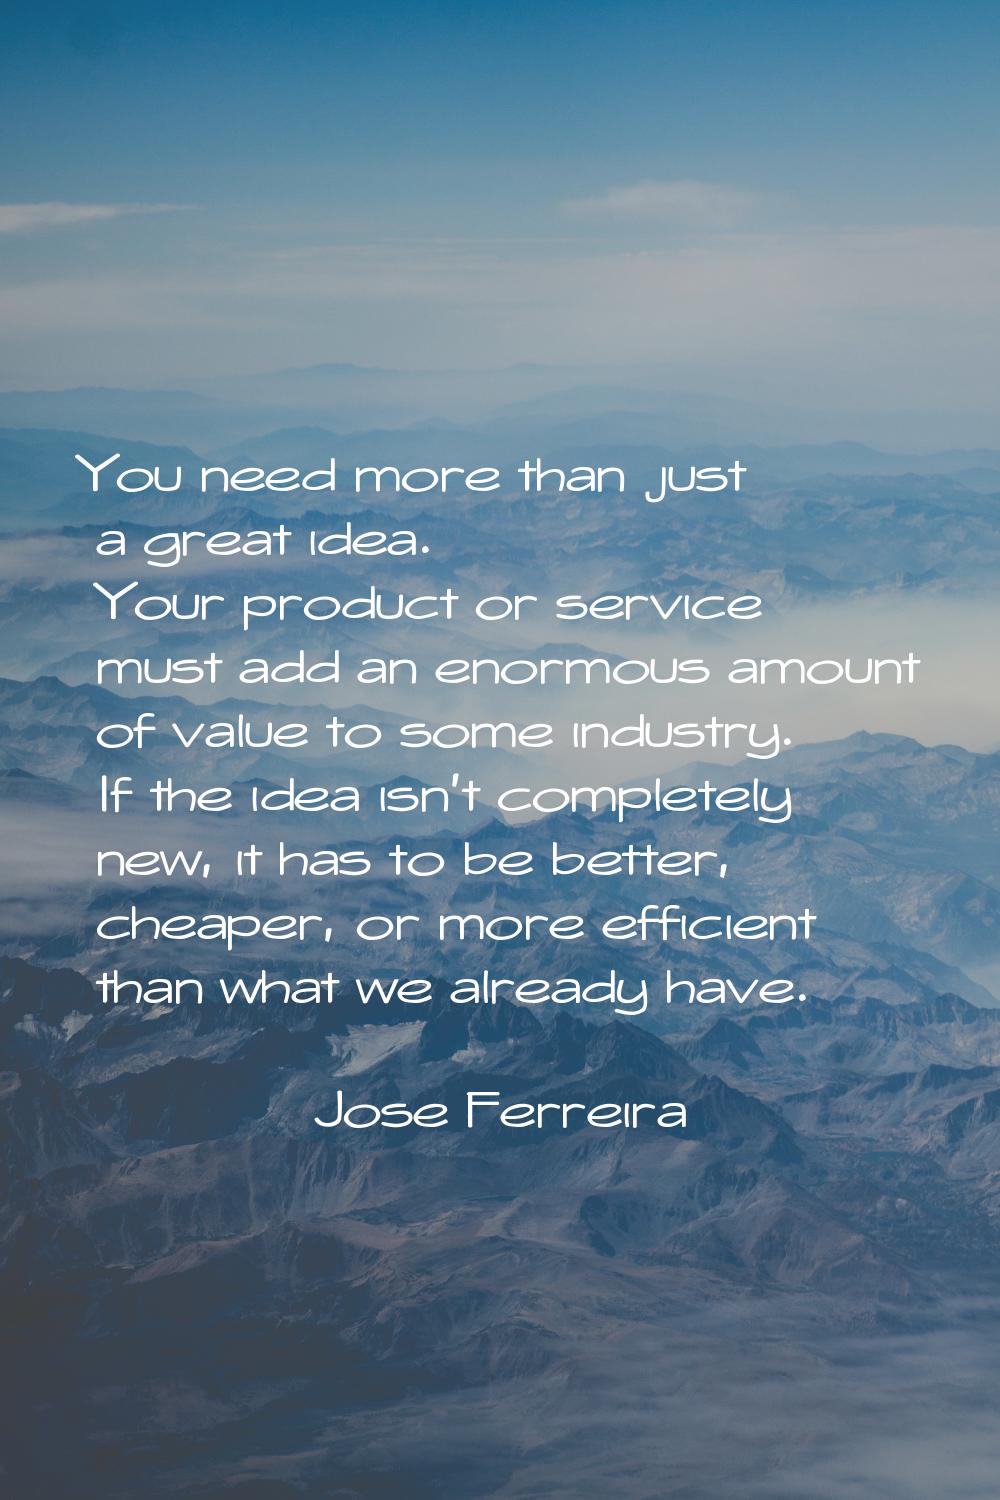 You need more than just a great idea. Your product or service must add an enormous amount of value 